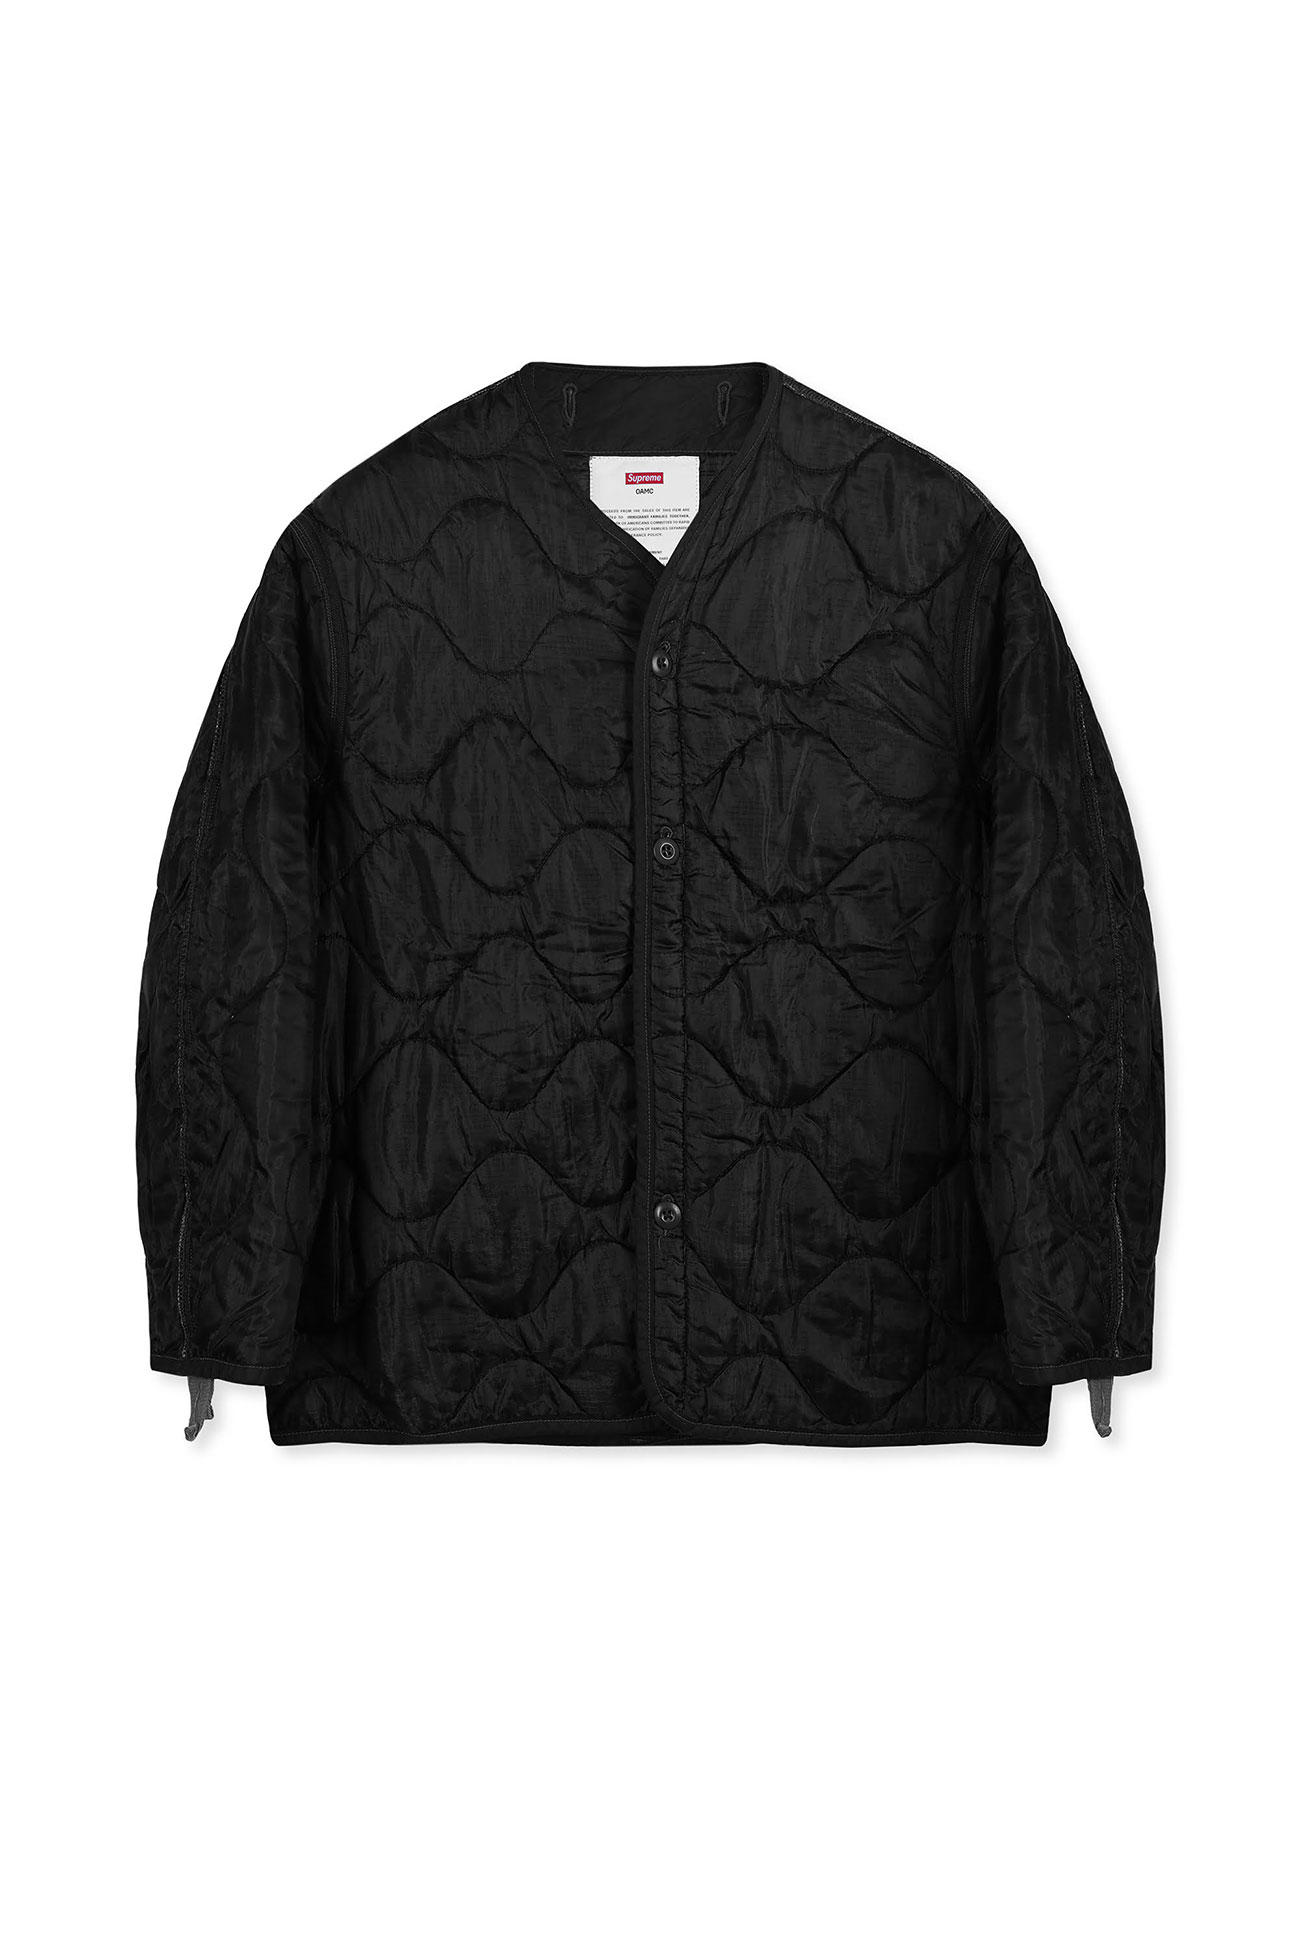 Supreme x OAMC Military Liner Jacket Release | Drops | Hypebeast